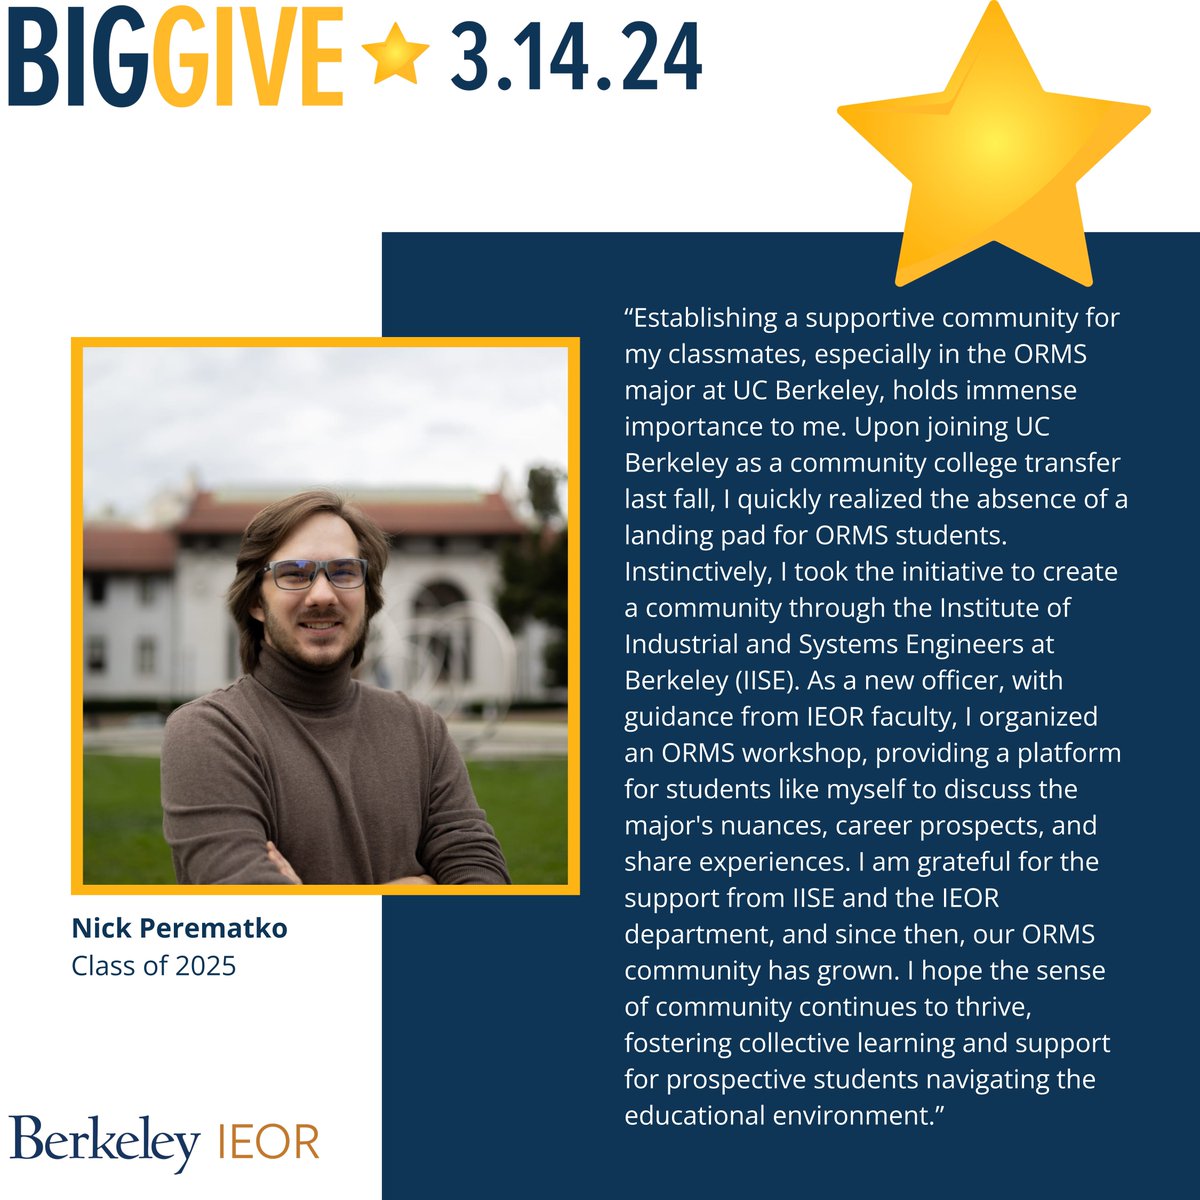 Our students inspire us every day! Your gift to Berkeley IEOR gives our students the resources they need to become leaders who work toward a brighter future. Donate: bit.ly/49LyspM #CalBigGive #BerkeleyIEOR #FundFutureEngineers